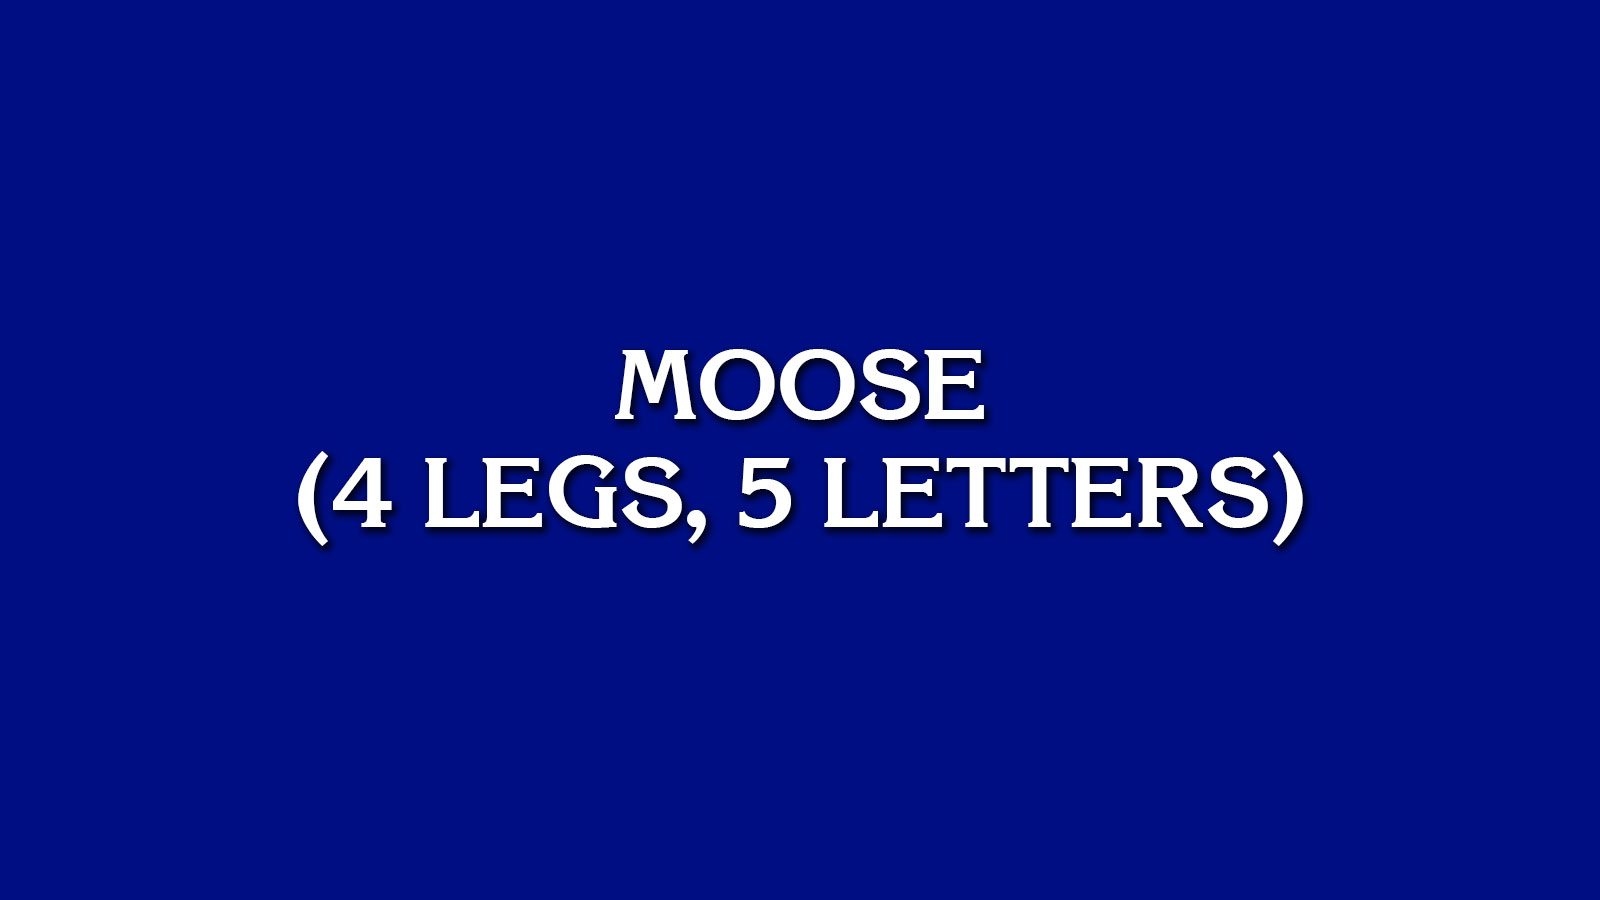 Can You Beat an Easy Game of “Jeopardy!”? 215